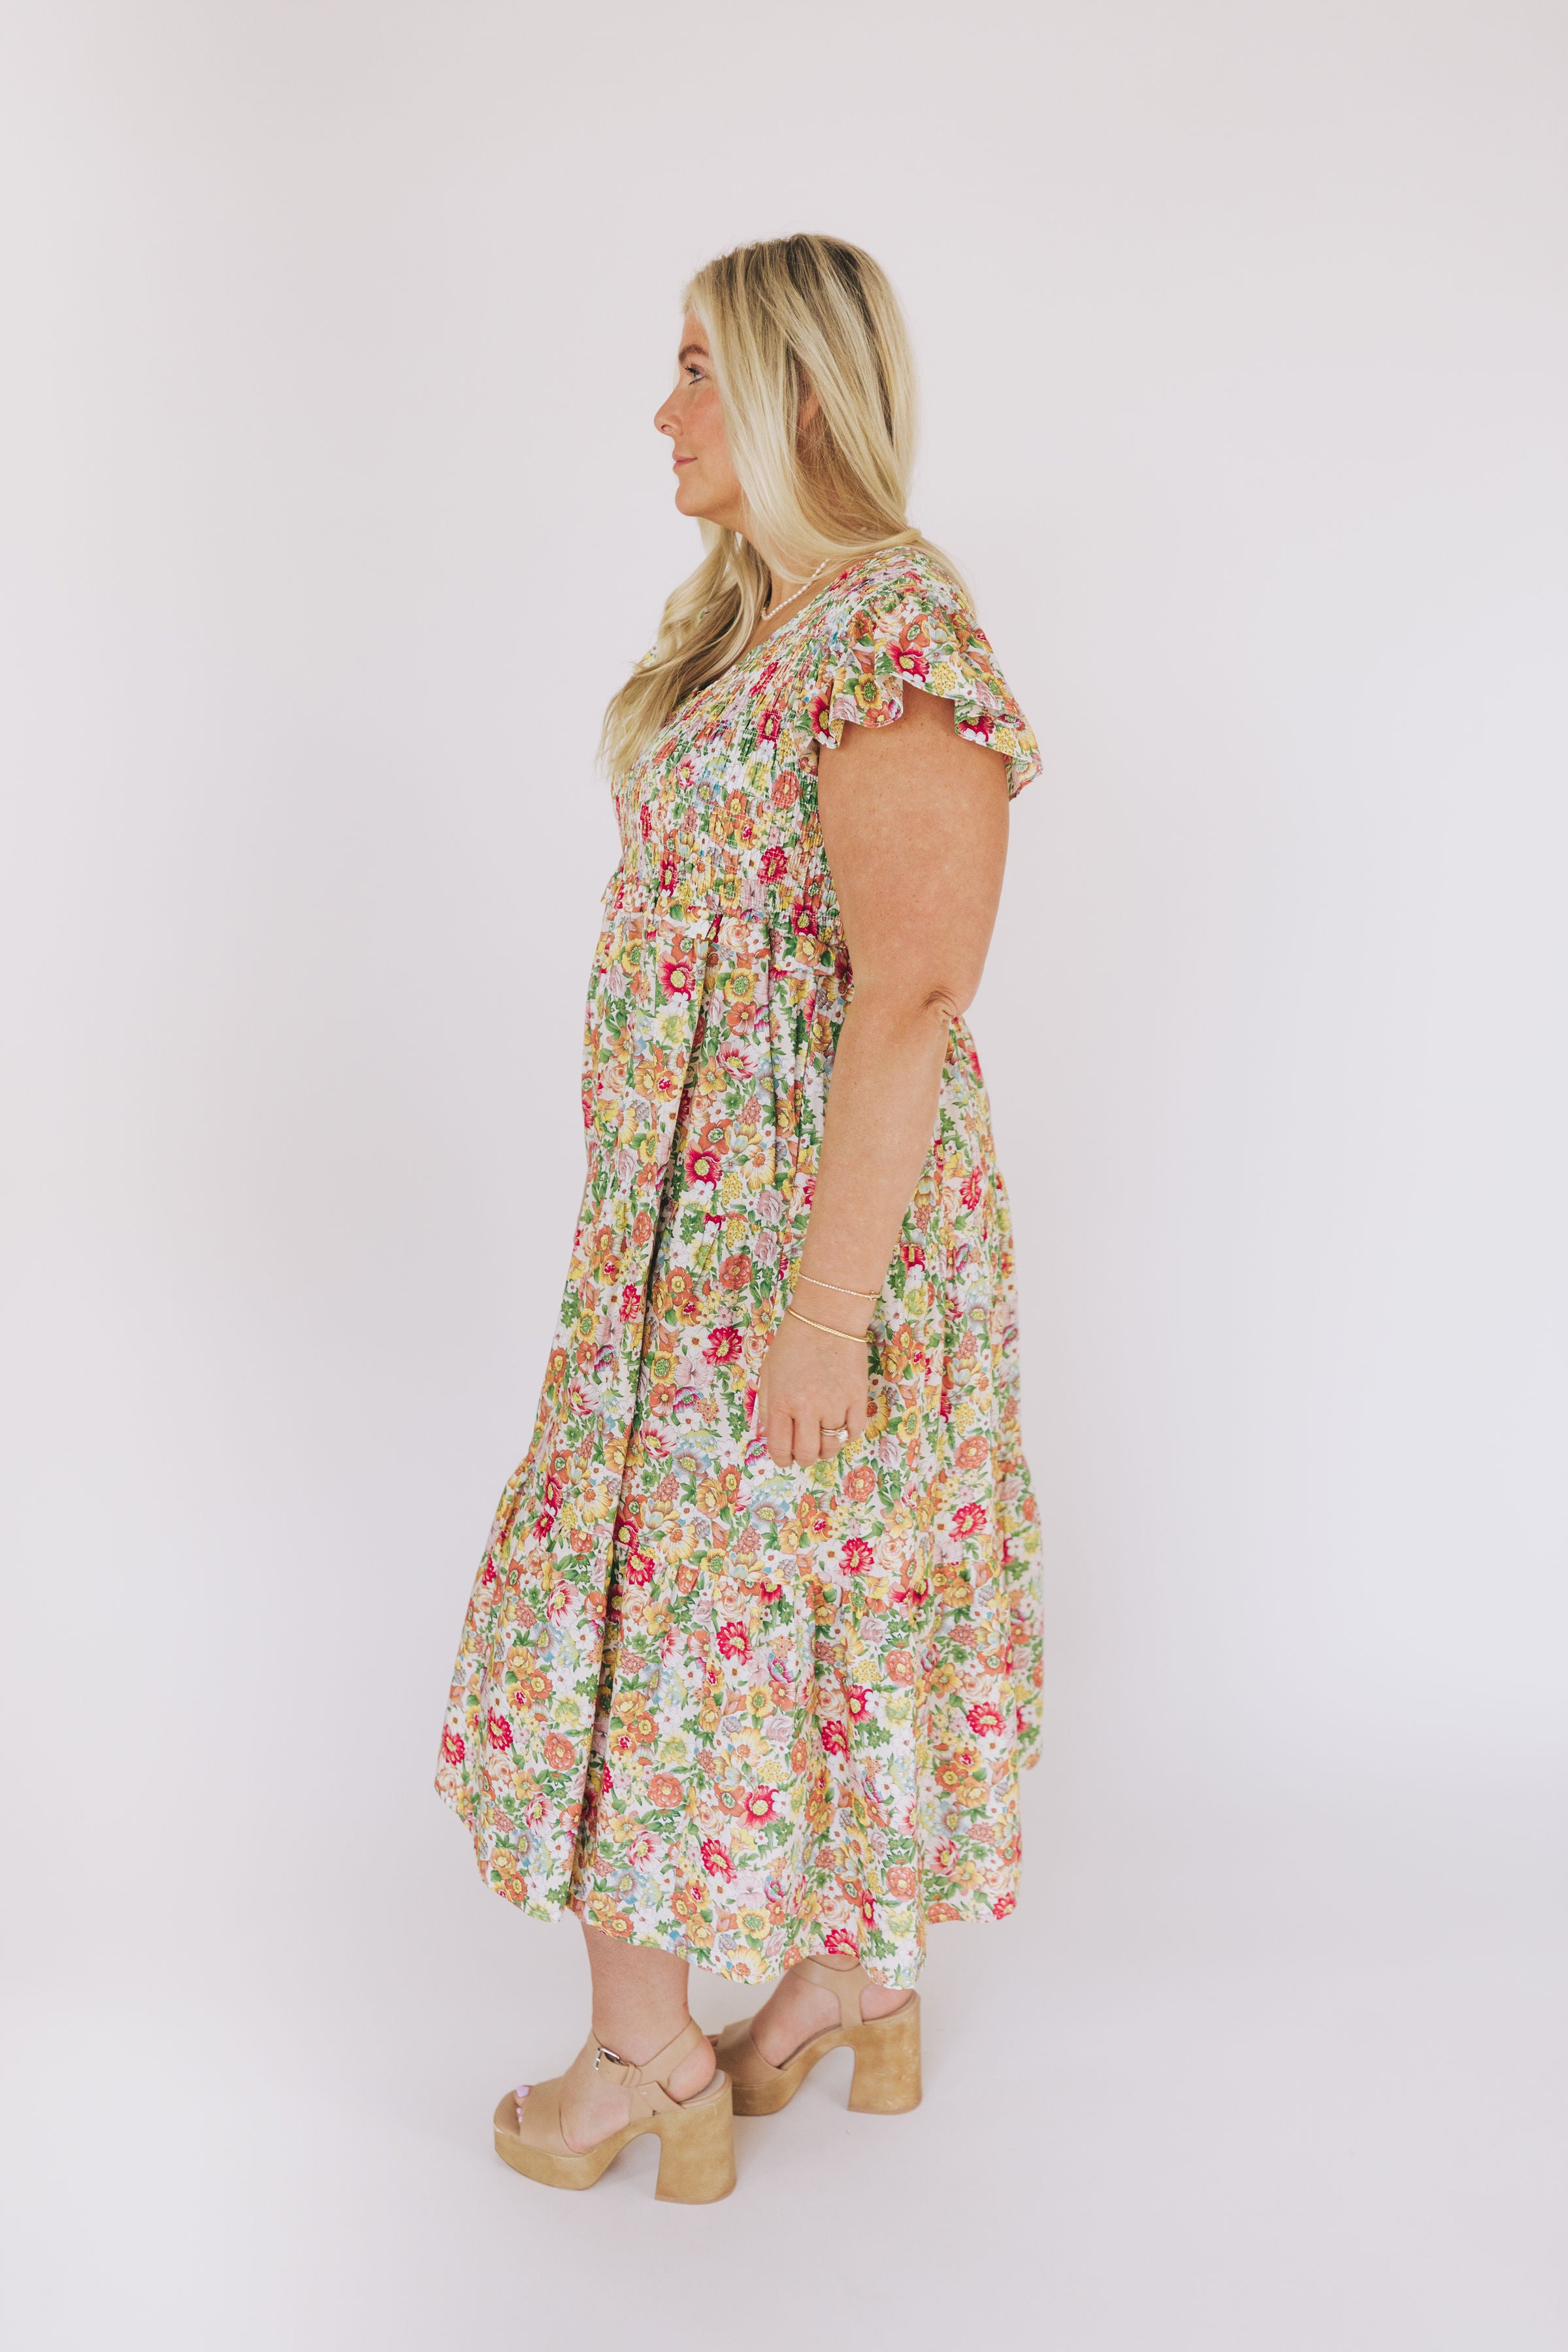 PLUS SIZE - In The Breeze Dress - 2 colors!